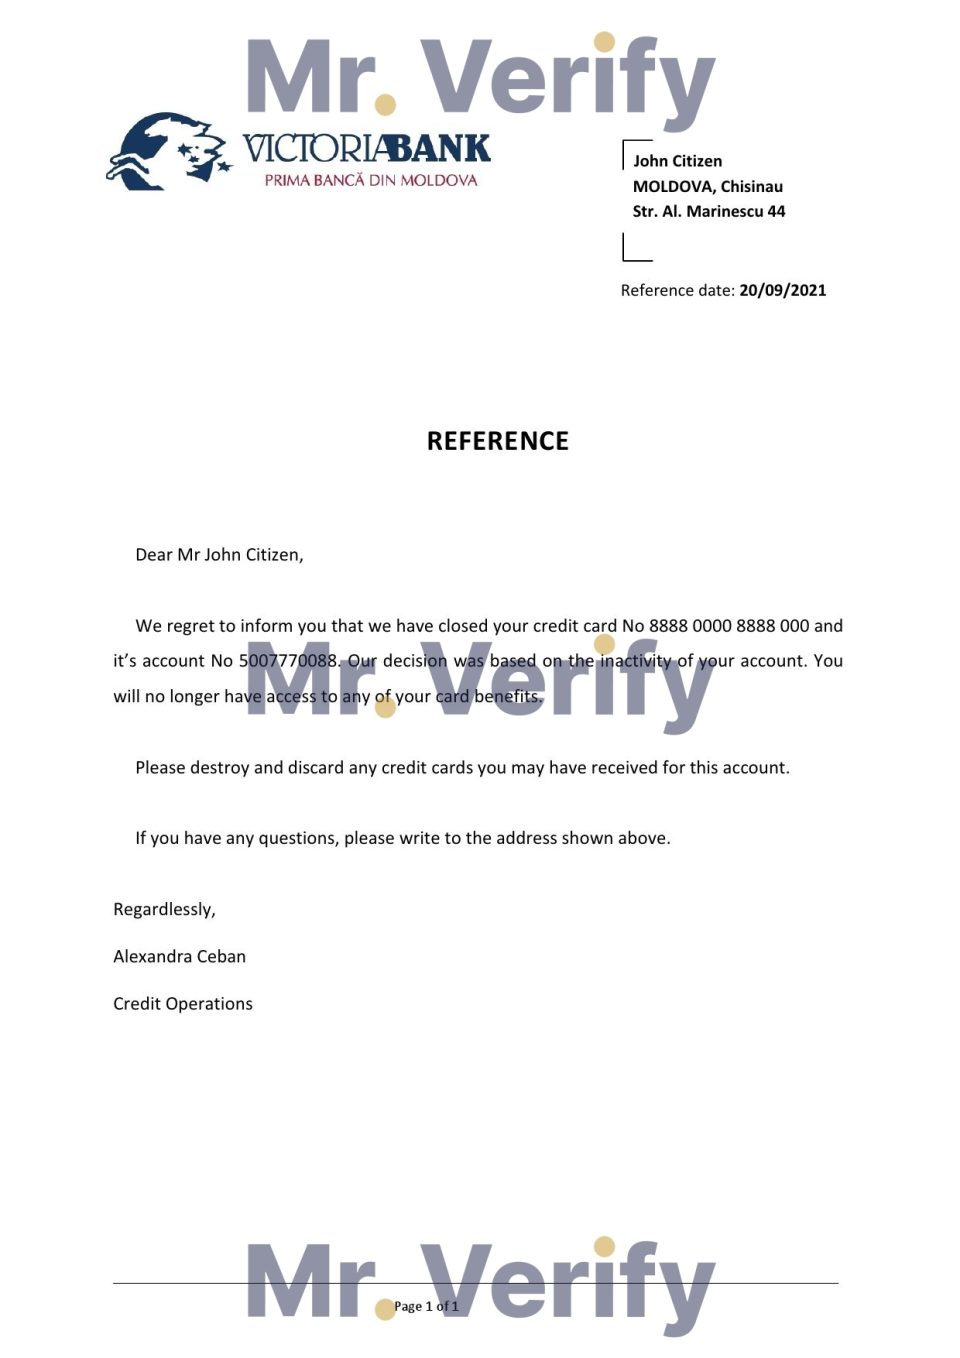 Download Moldova Victoriabank Bank Reference Letter Templates | Editable Word